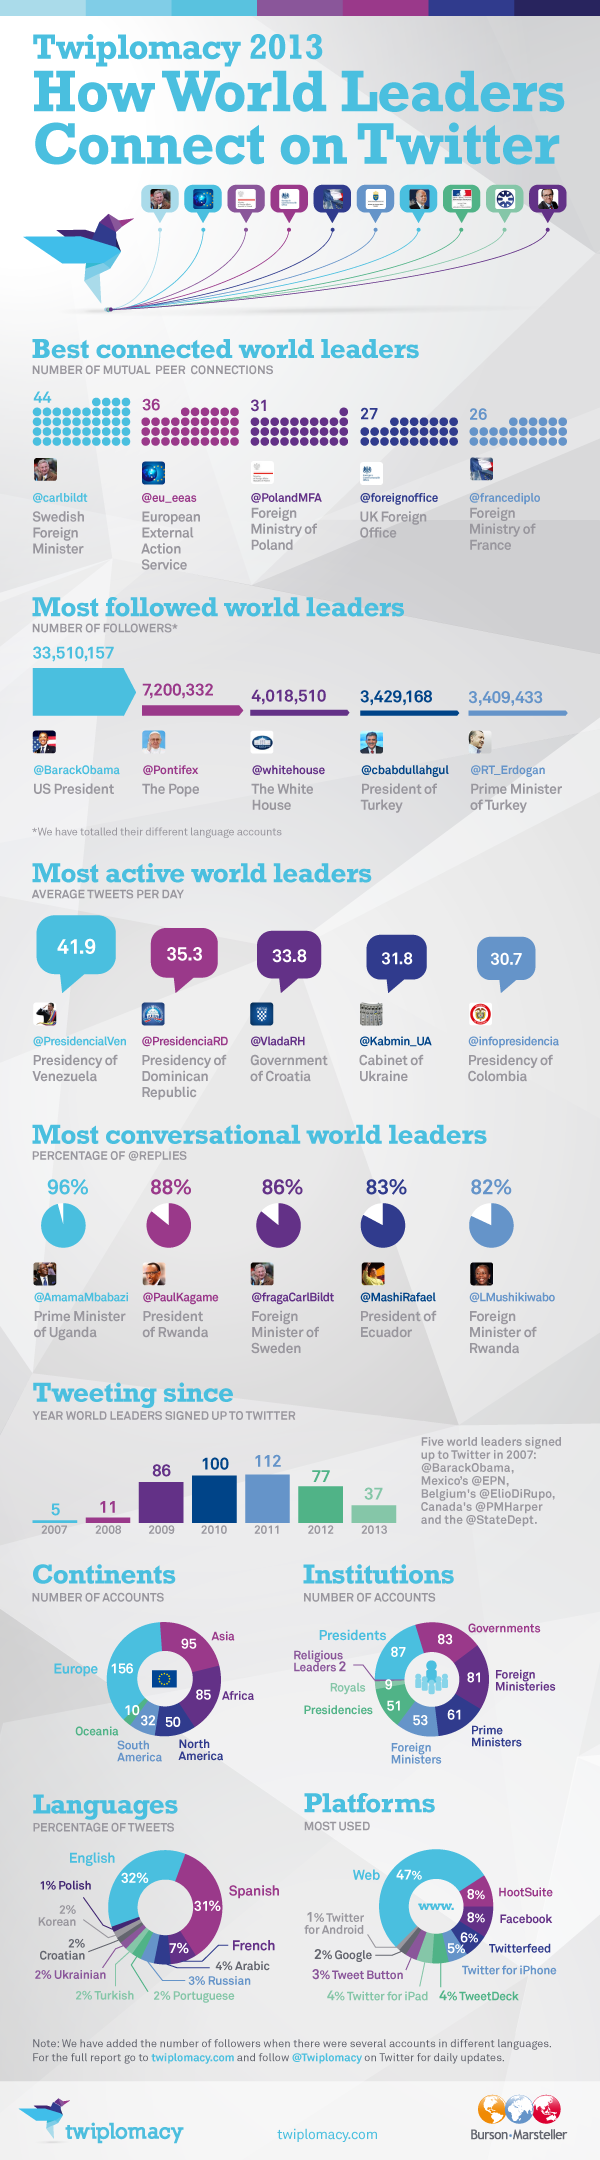 How World Leaders Copnnect on Twitter (Twiplomacy 2013)